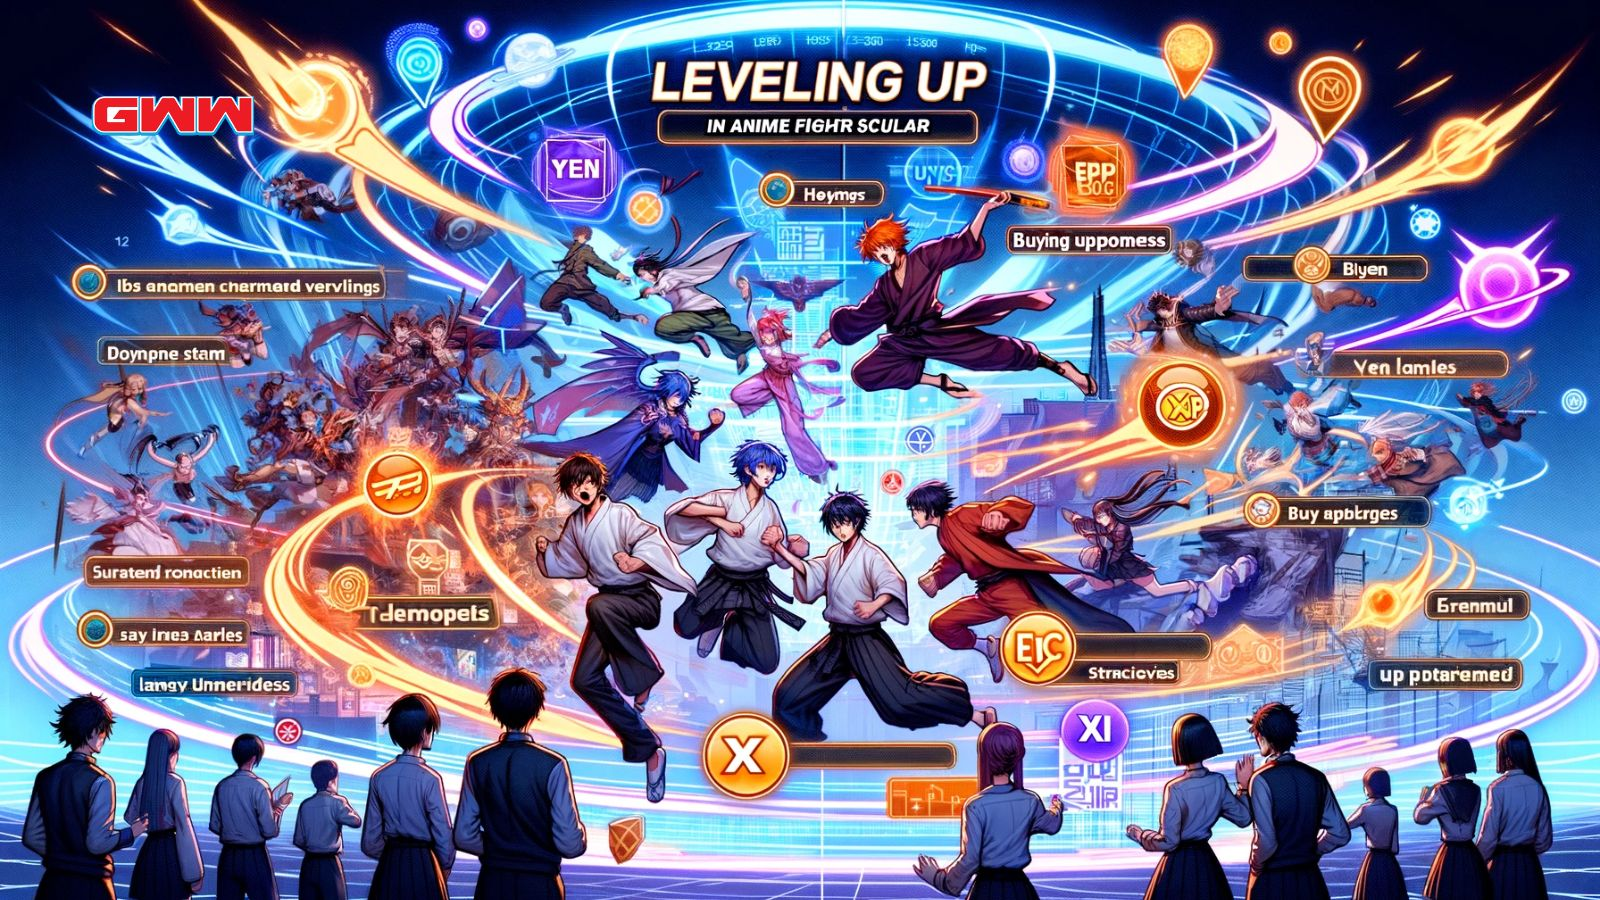 Dynamic battle scene, how to level up in Anime Fighters Simulator